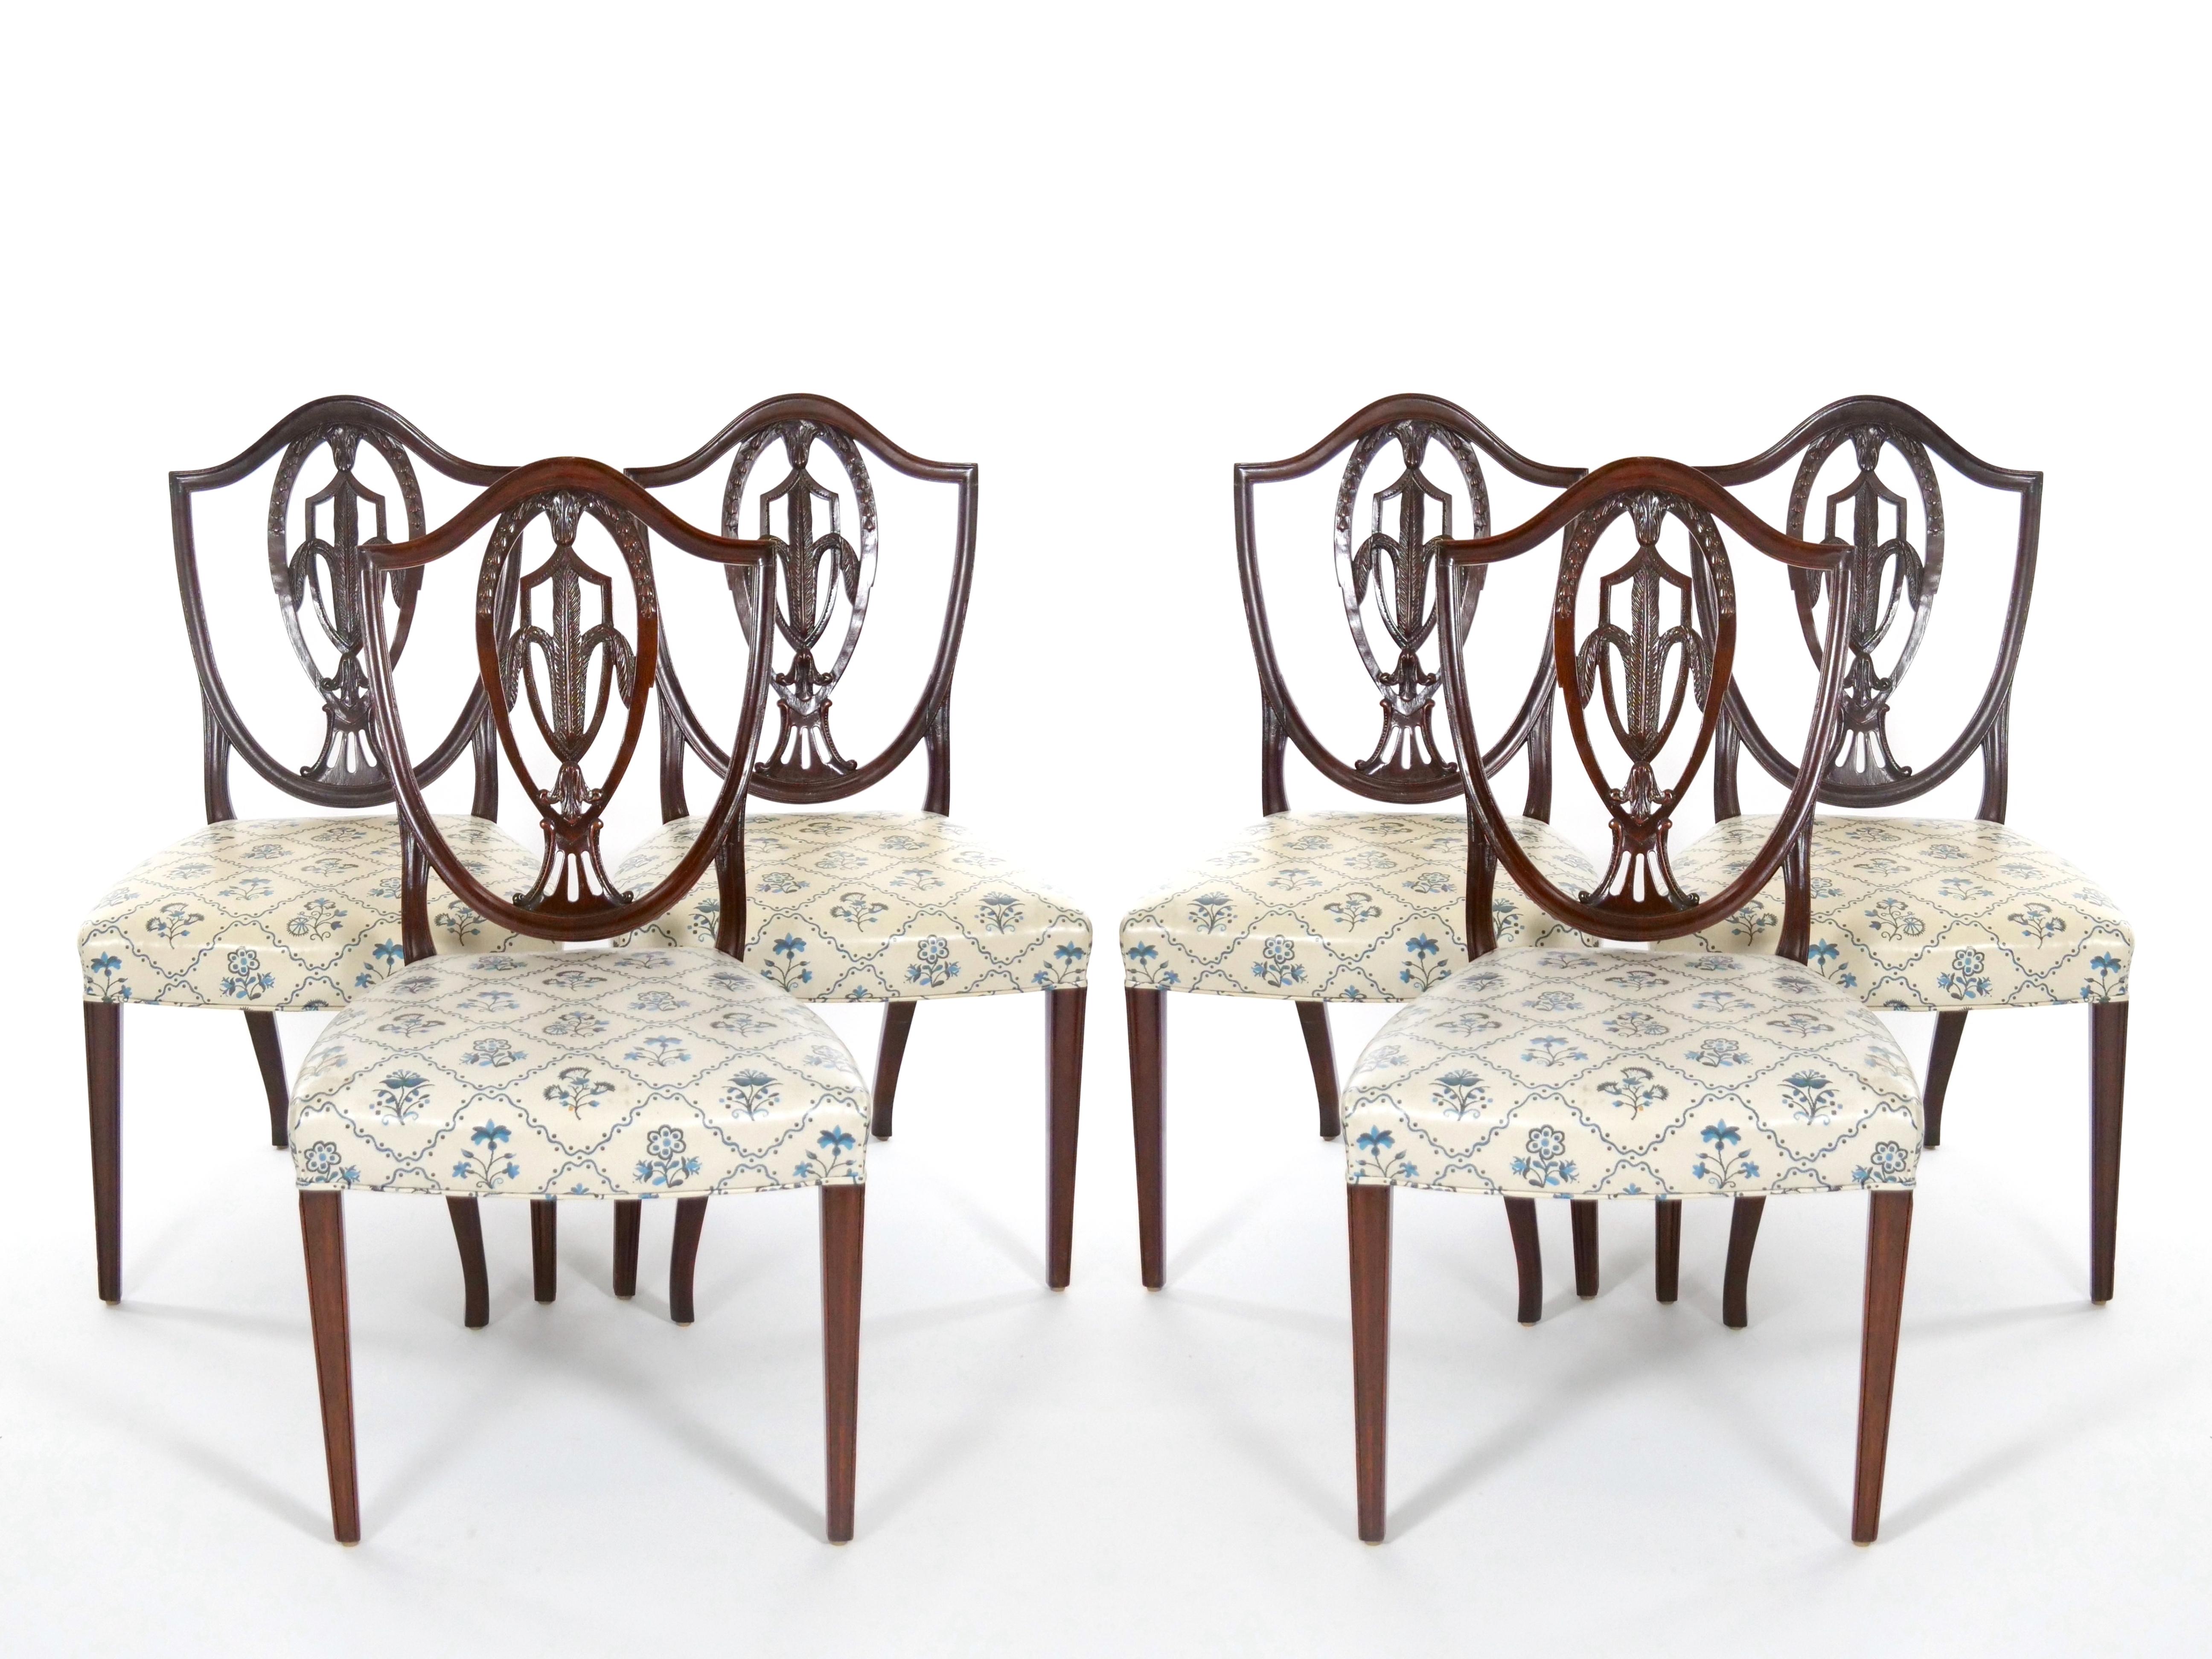 Presenting an exquisite set of antique Hepplewhite style dining chairs crafted from rich mahogany, showcasing the elegant Prince of Wales design. The set comprises two distinguished armchairs and six charming side chairs, each meticulously fashioned